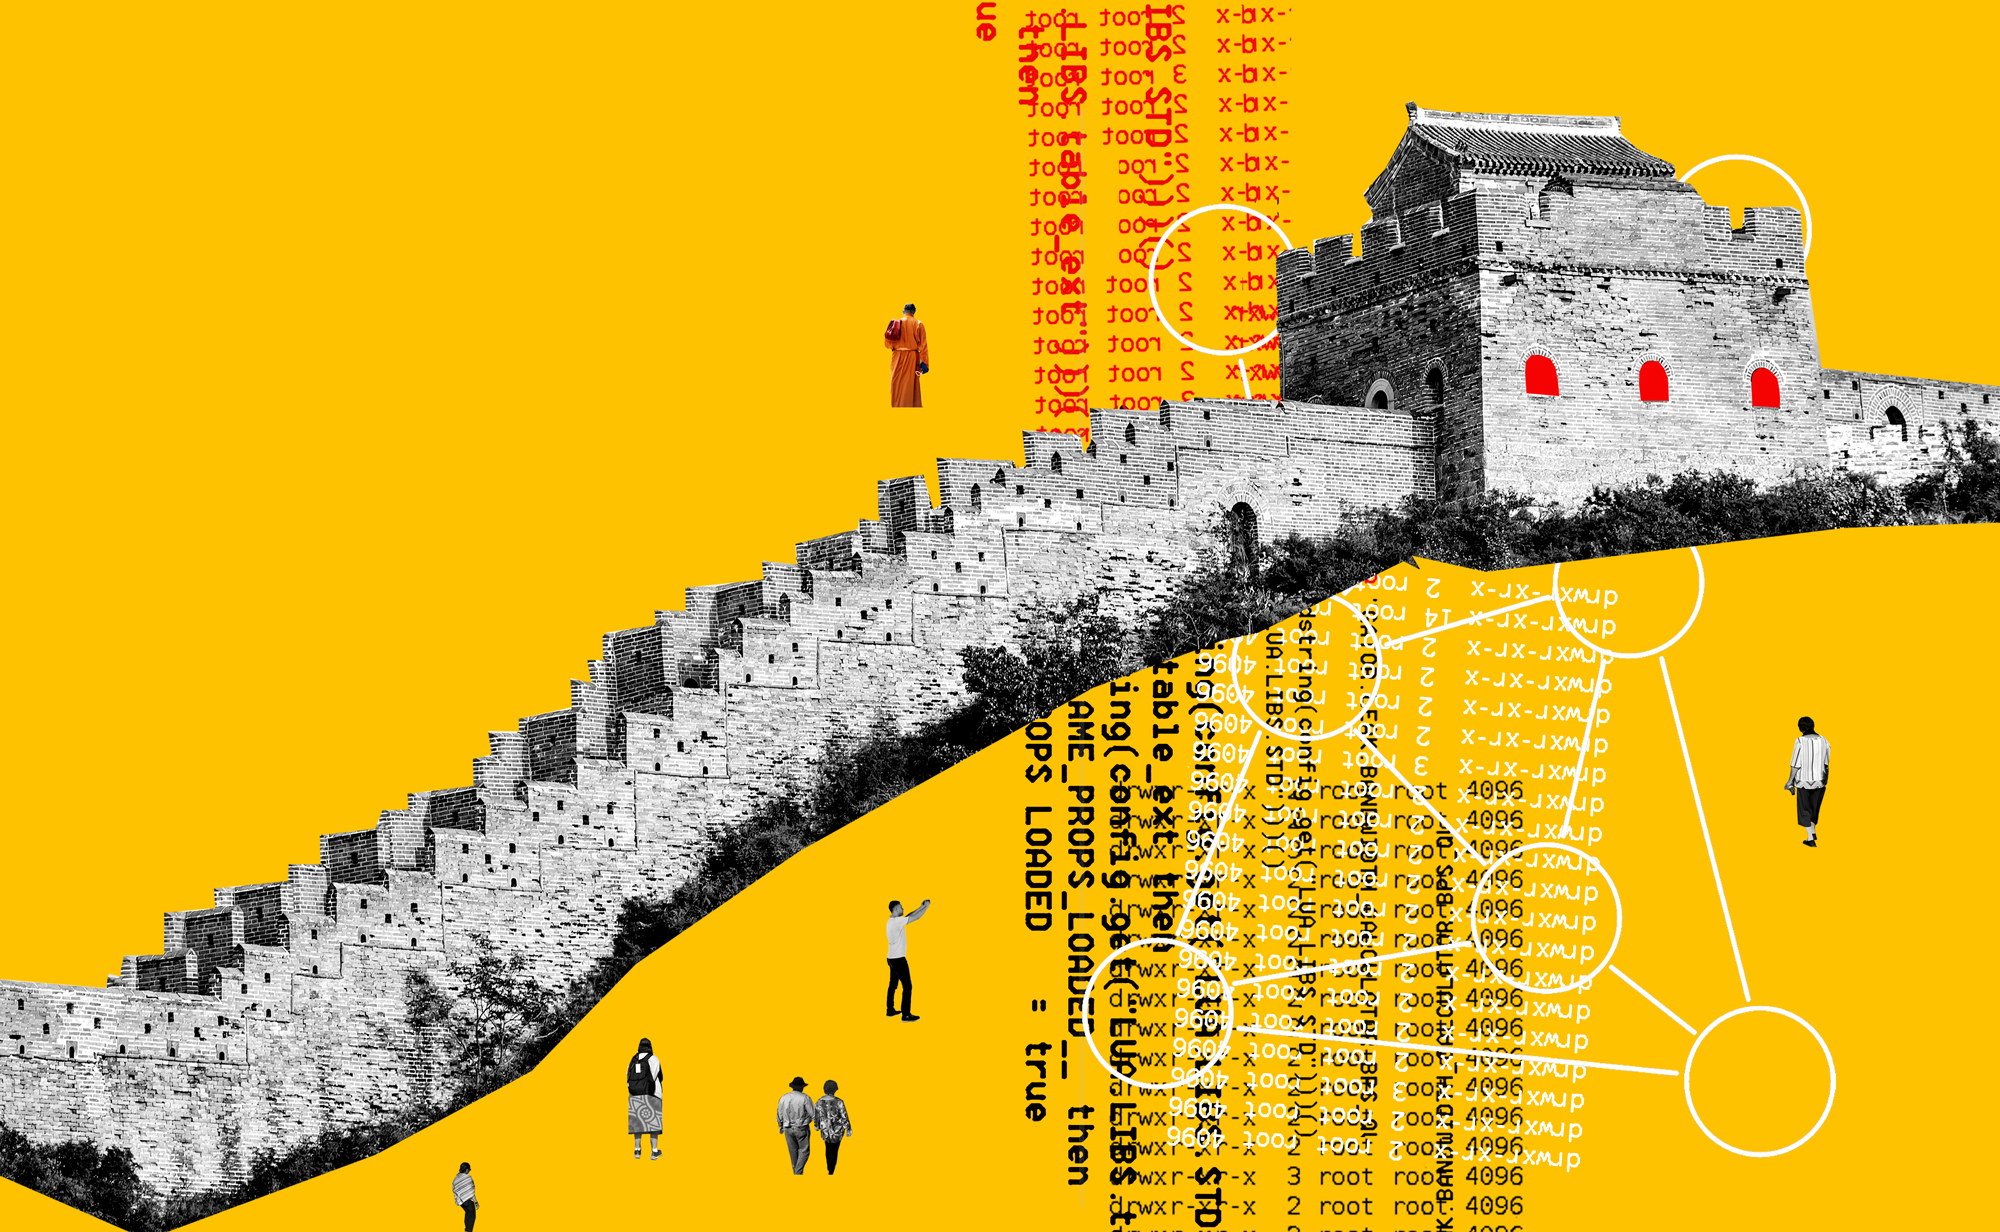 When Chinese hackers declared war on the rest of us | MIT Technology Review